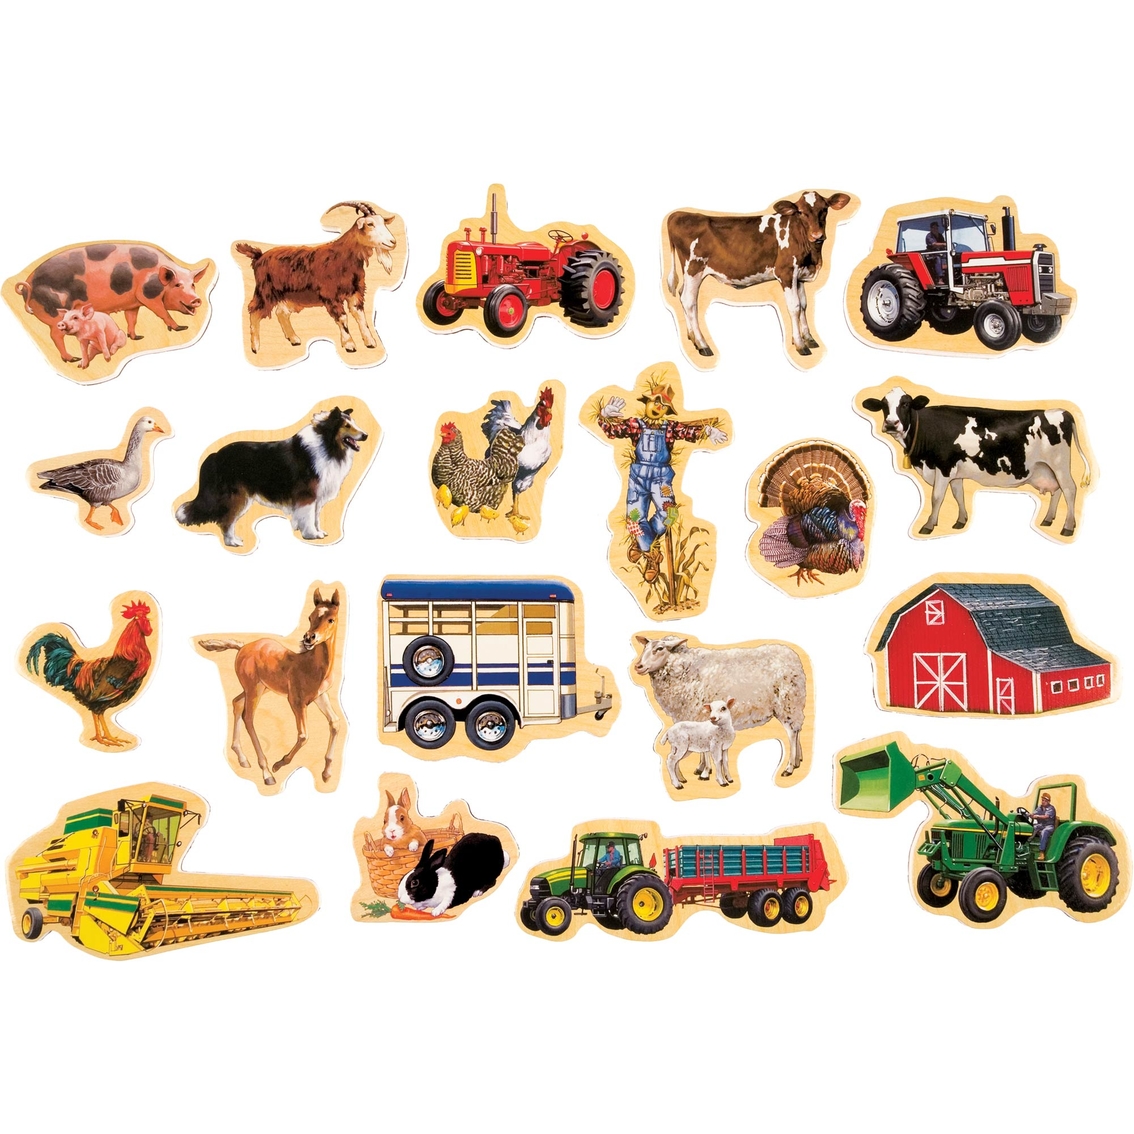 T.S. Shure Farm Vehicles Wooden Magnets 20 pc. MagnaFun Set - Image 3 of 3